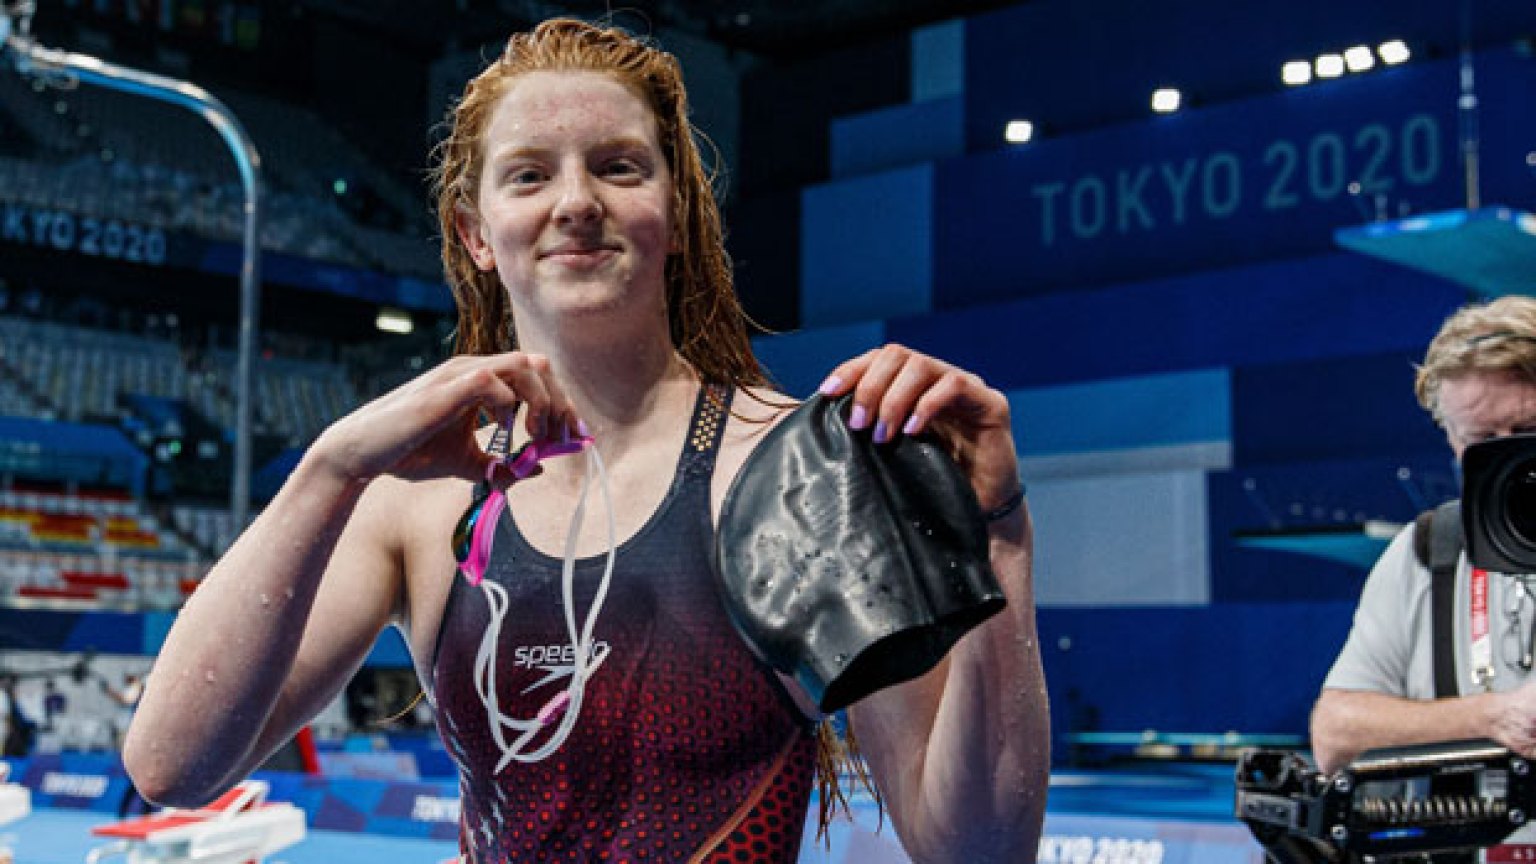 Who Is Lydia Jacoby? 5 Things About Swimmer Who Won Olympic Gold